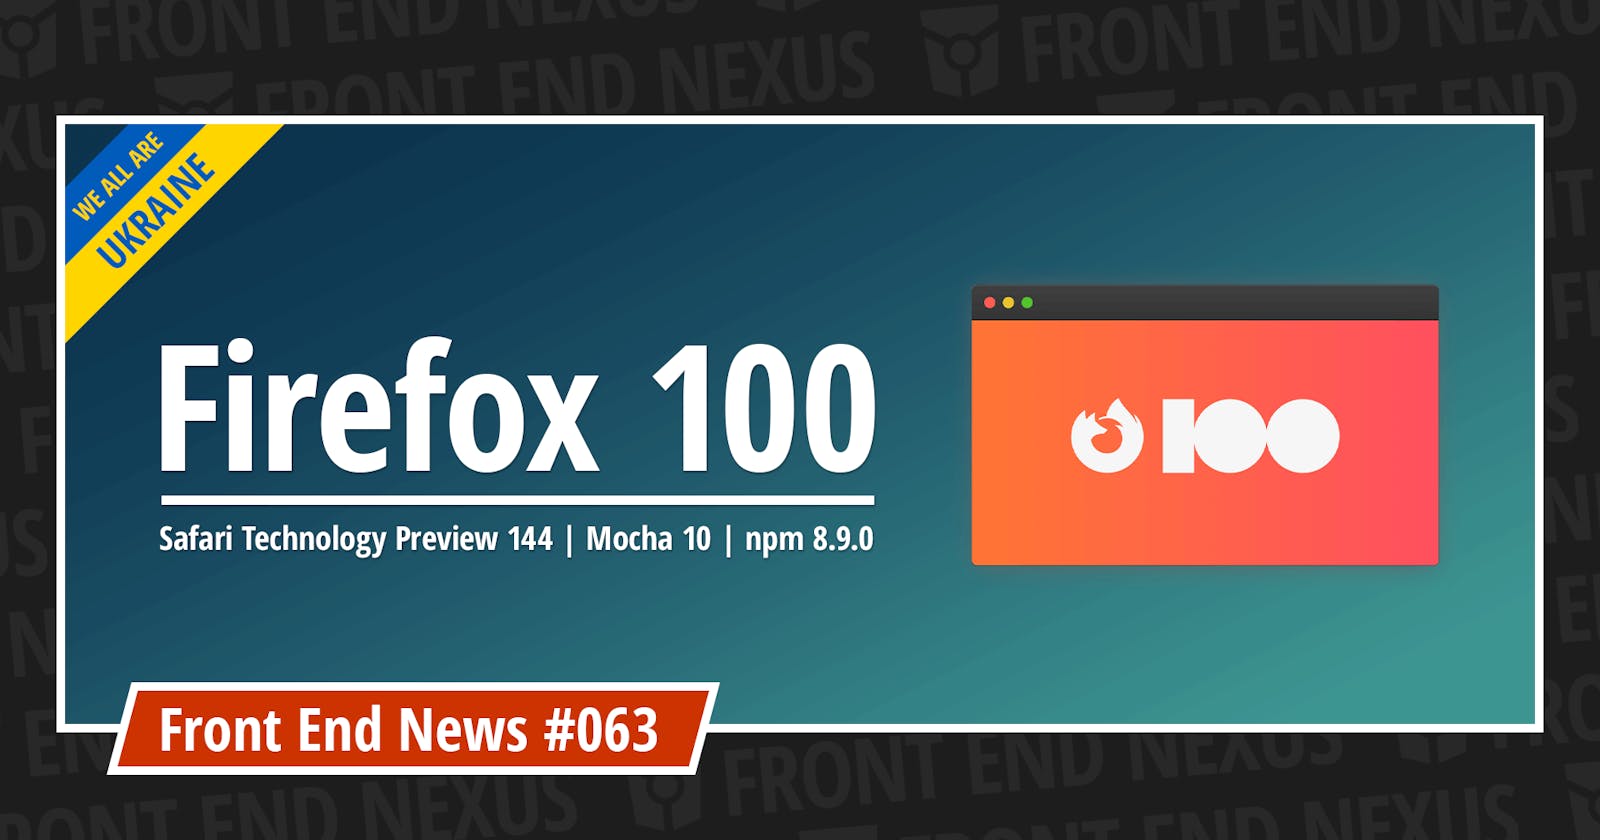 Celebrating Firefox 100, Safari Technology Preview 144, Mocha 10, npm 8.9.0, and more | Front End News #063